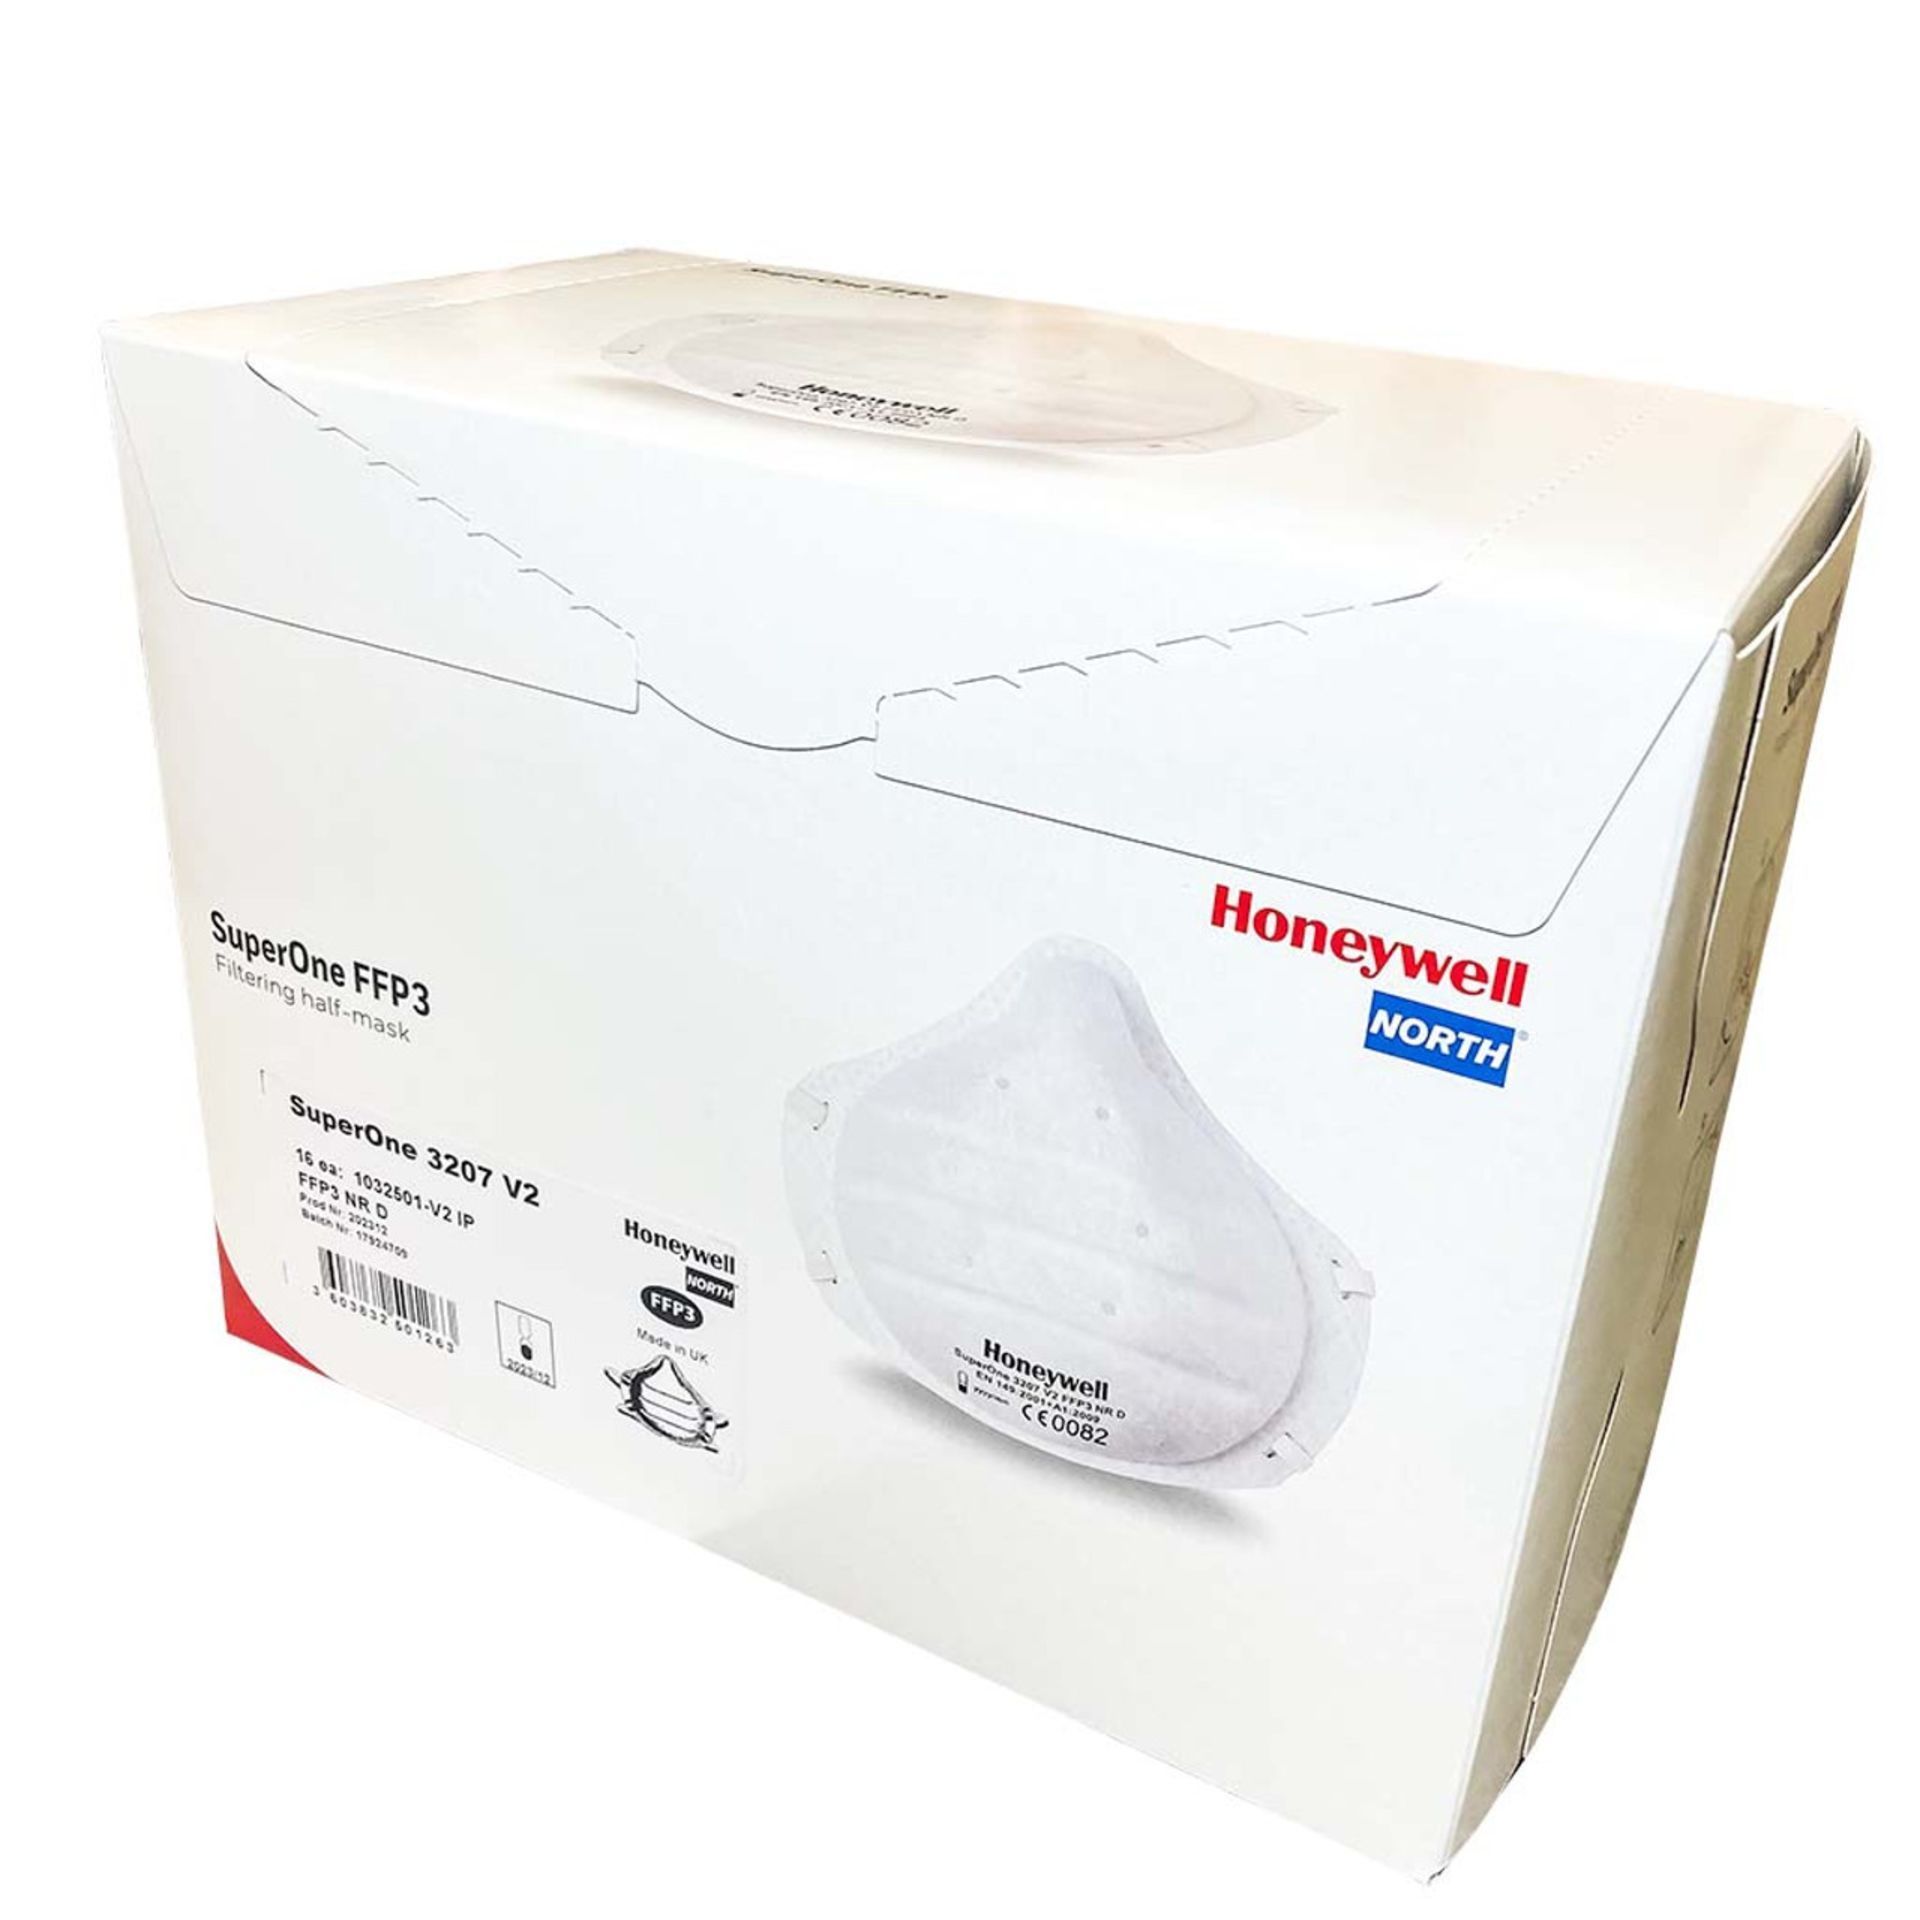 PALLET TO CONTAIN 4,608 X Honeywell SuperOne 3207 Filtering Half Mask FFP3 NR D. Boxed in boxes of